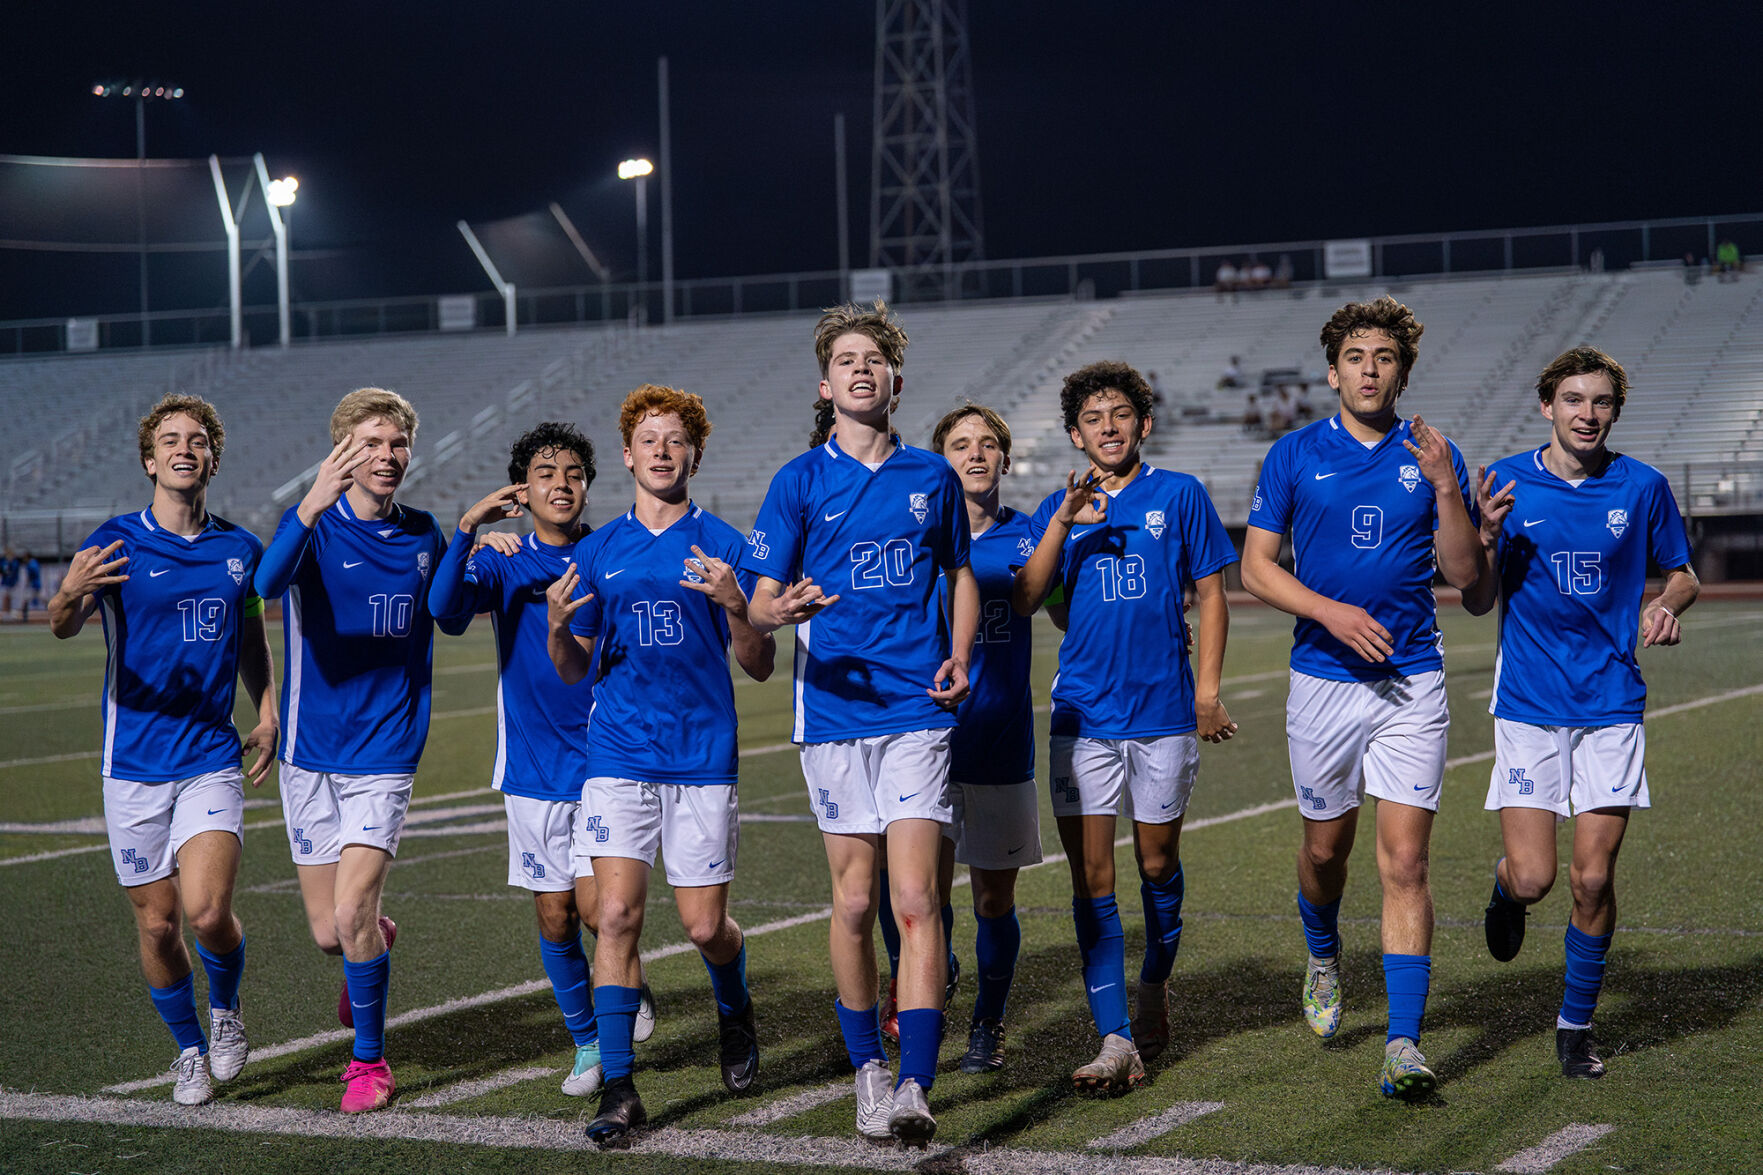 Isaac Leach’s Historic Four-Goal Performance Leads New Braunfels to Victory Over East Central